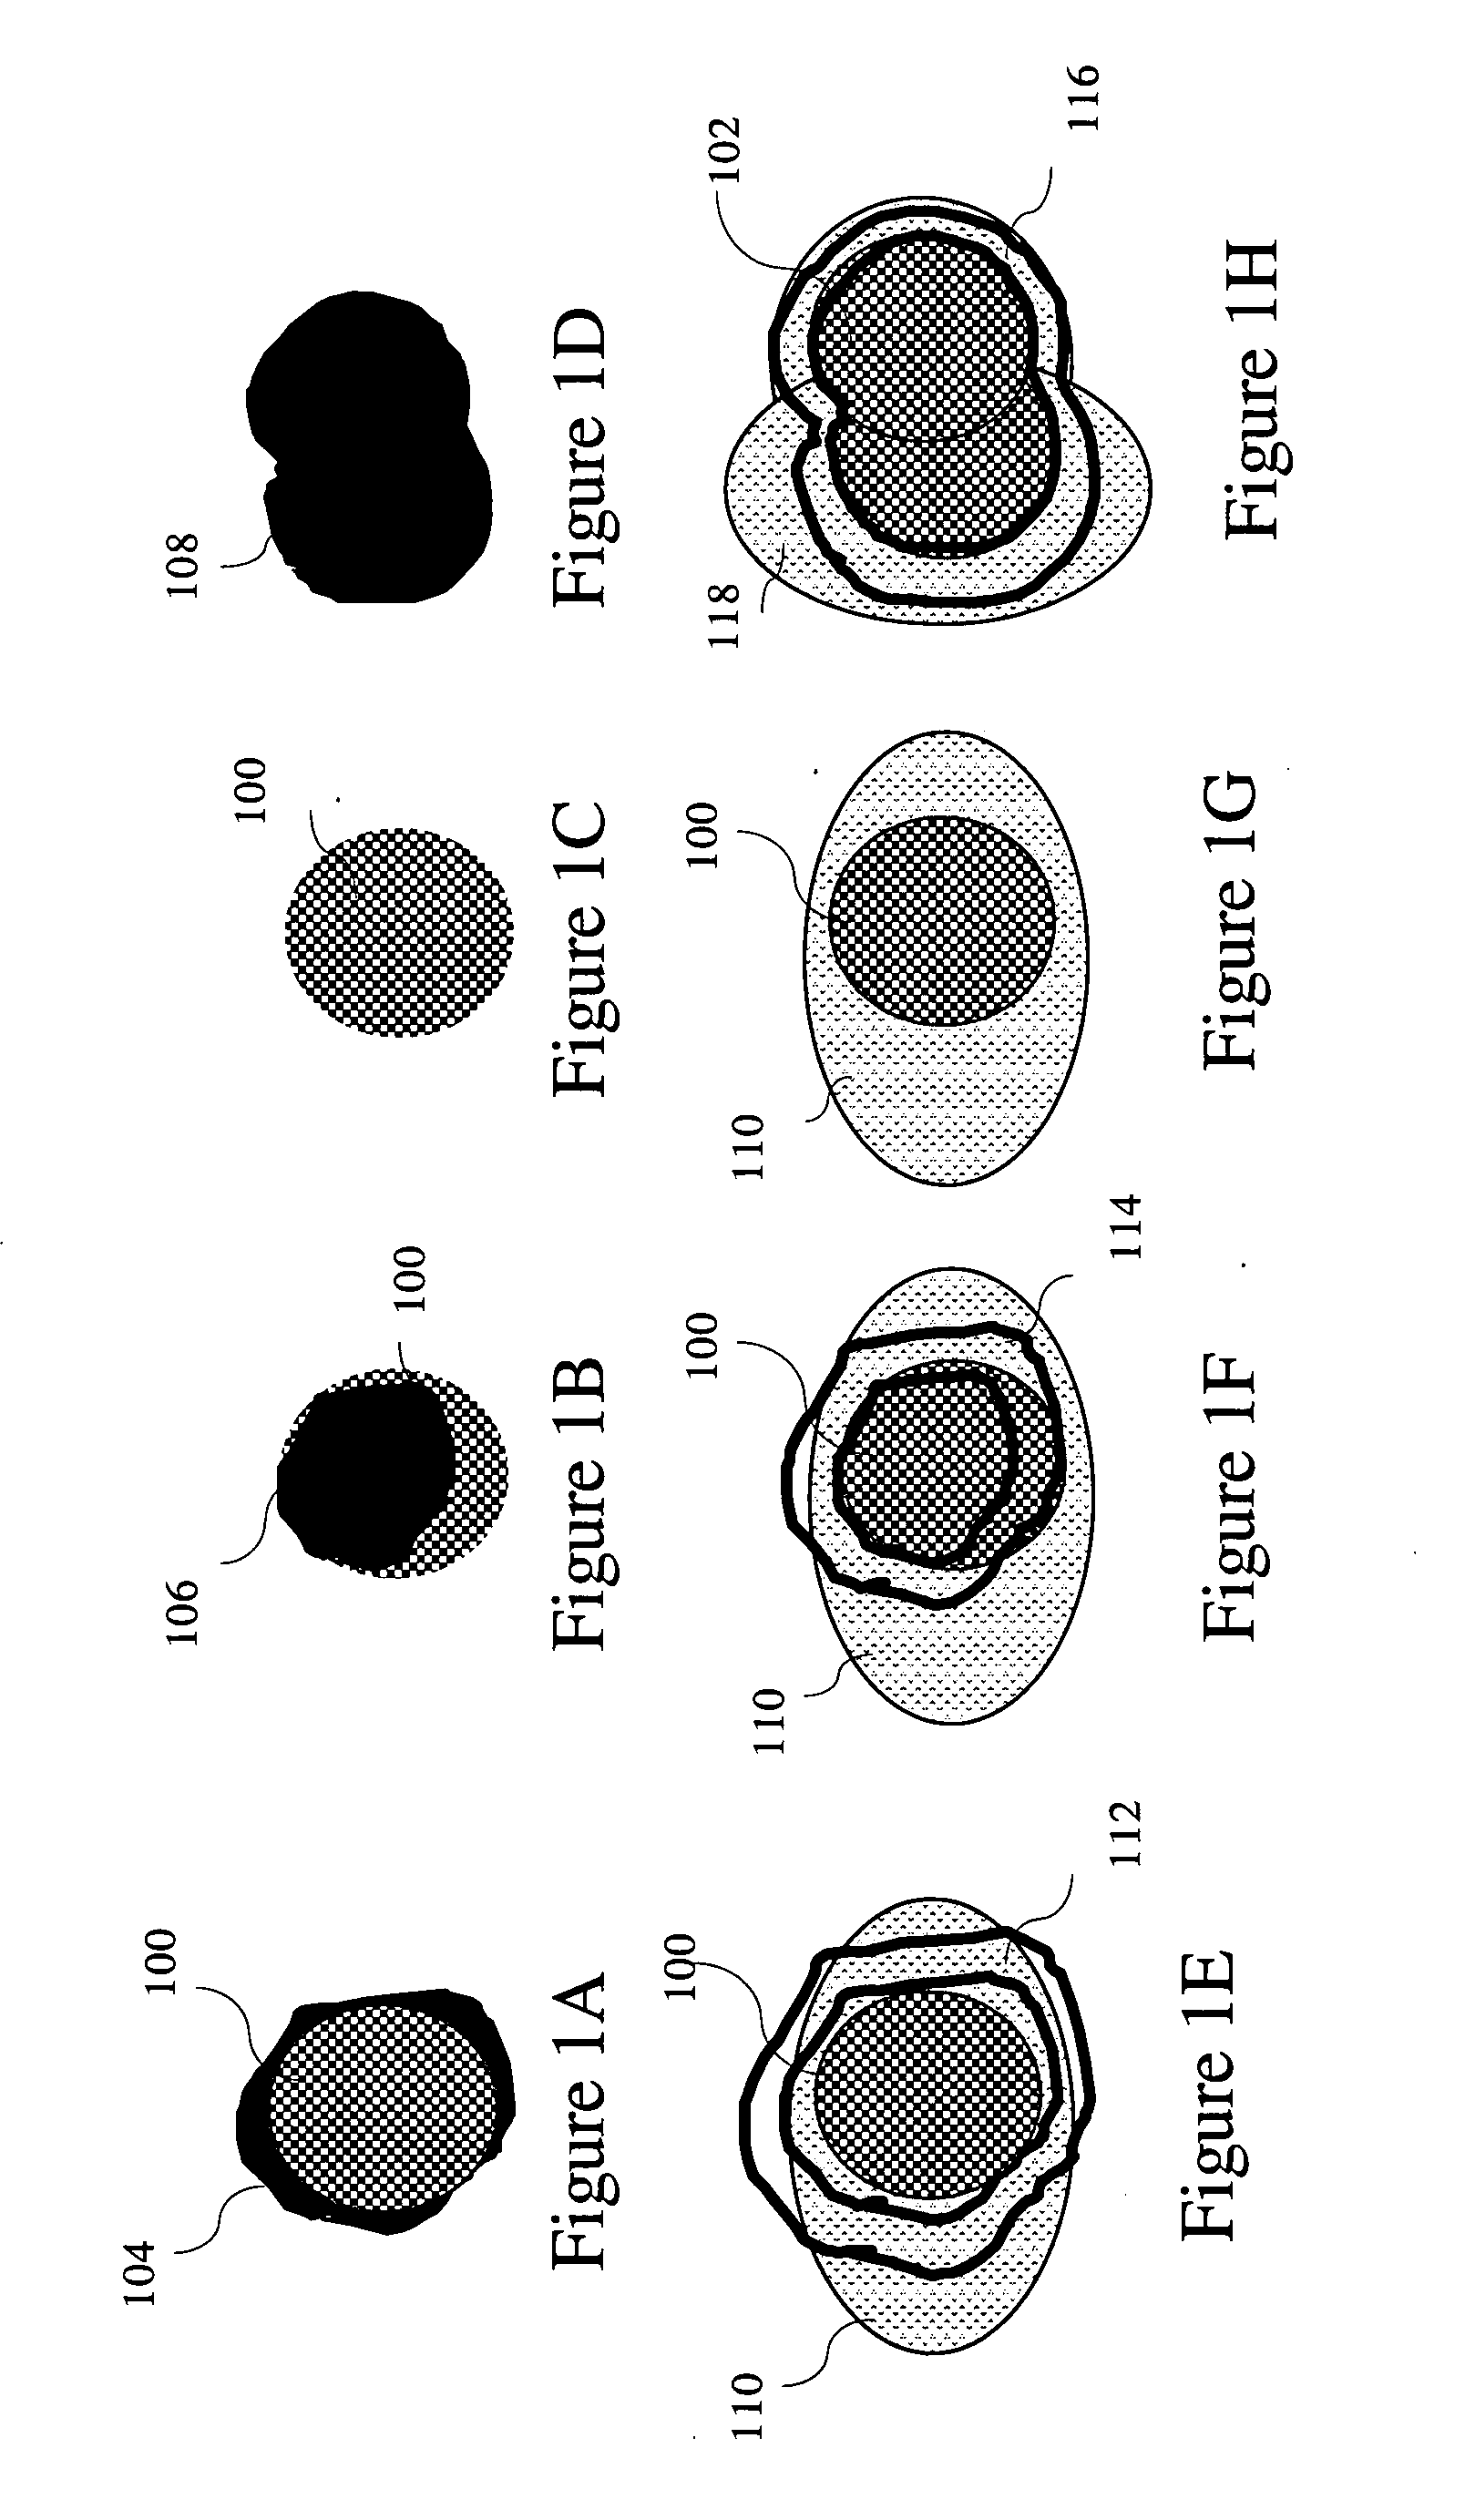 Method for robust analysis of biological activity in microscopy images